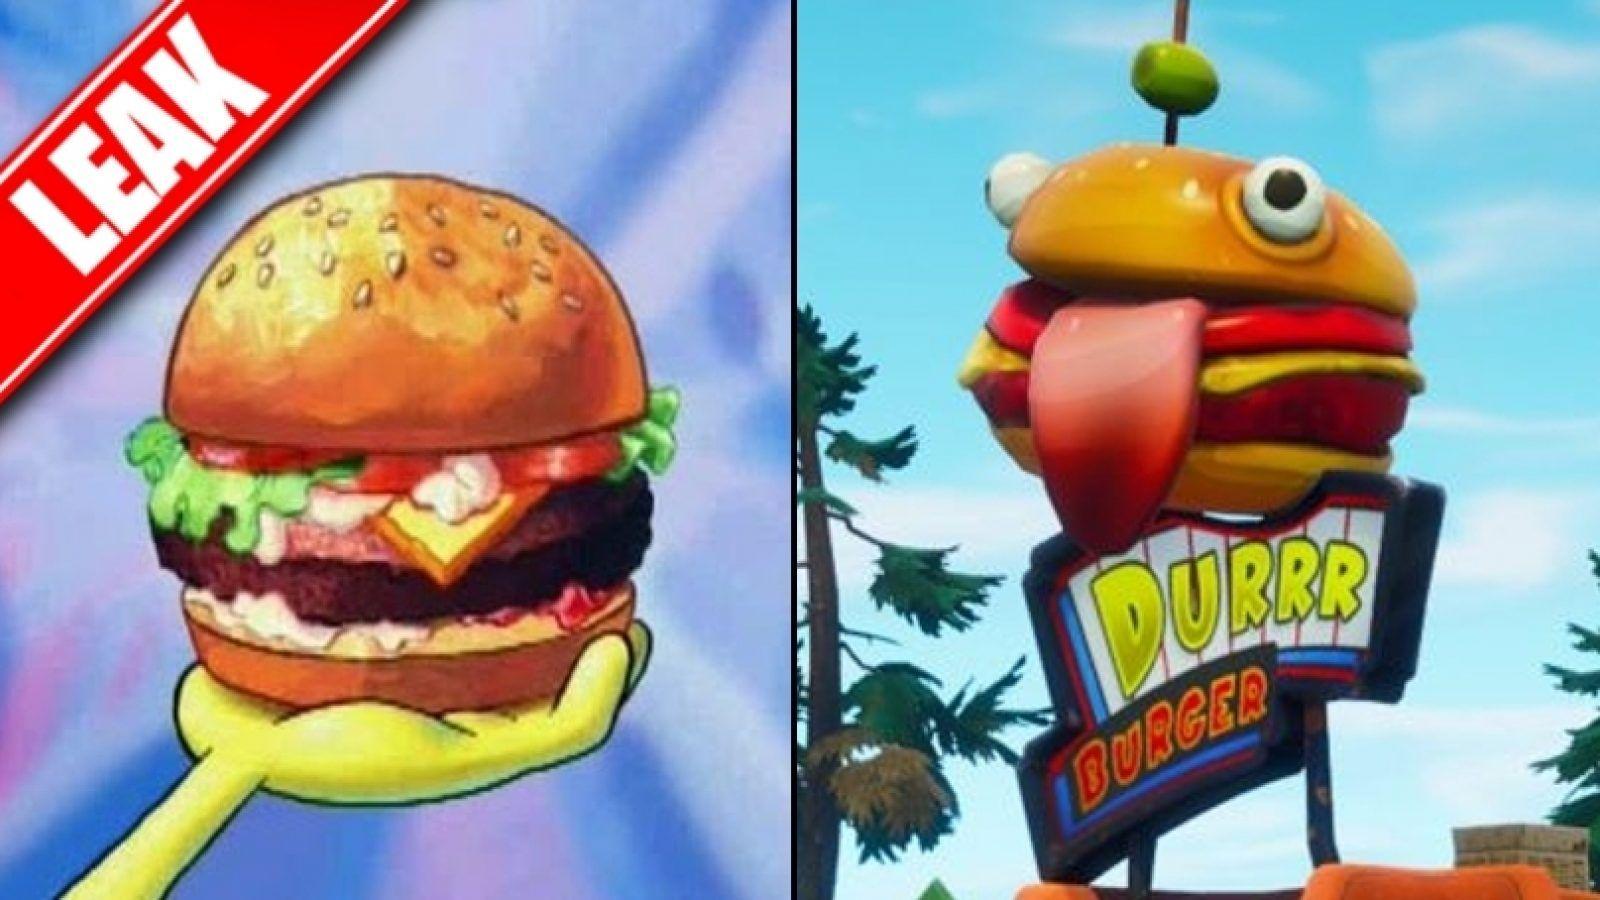 Durr Burger Logo - Fortnite: New Durr Burger consumable could be coming soon, according